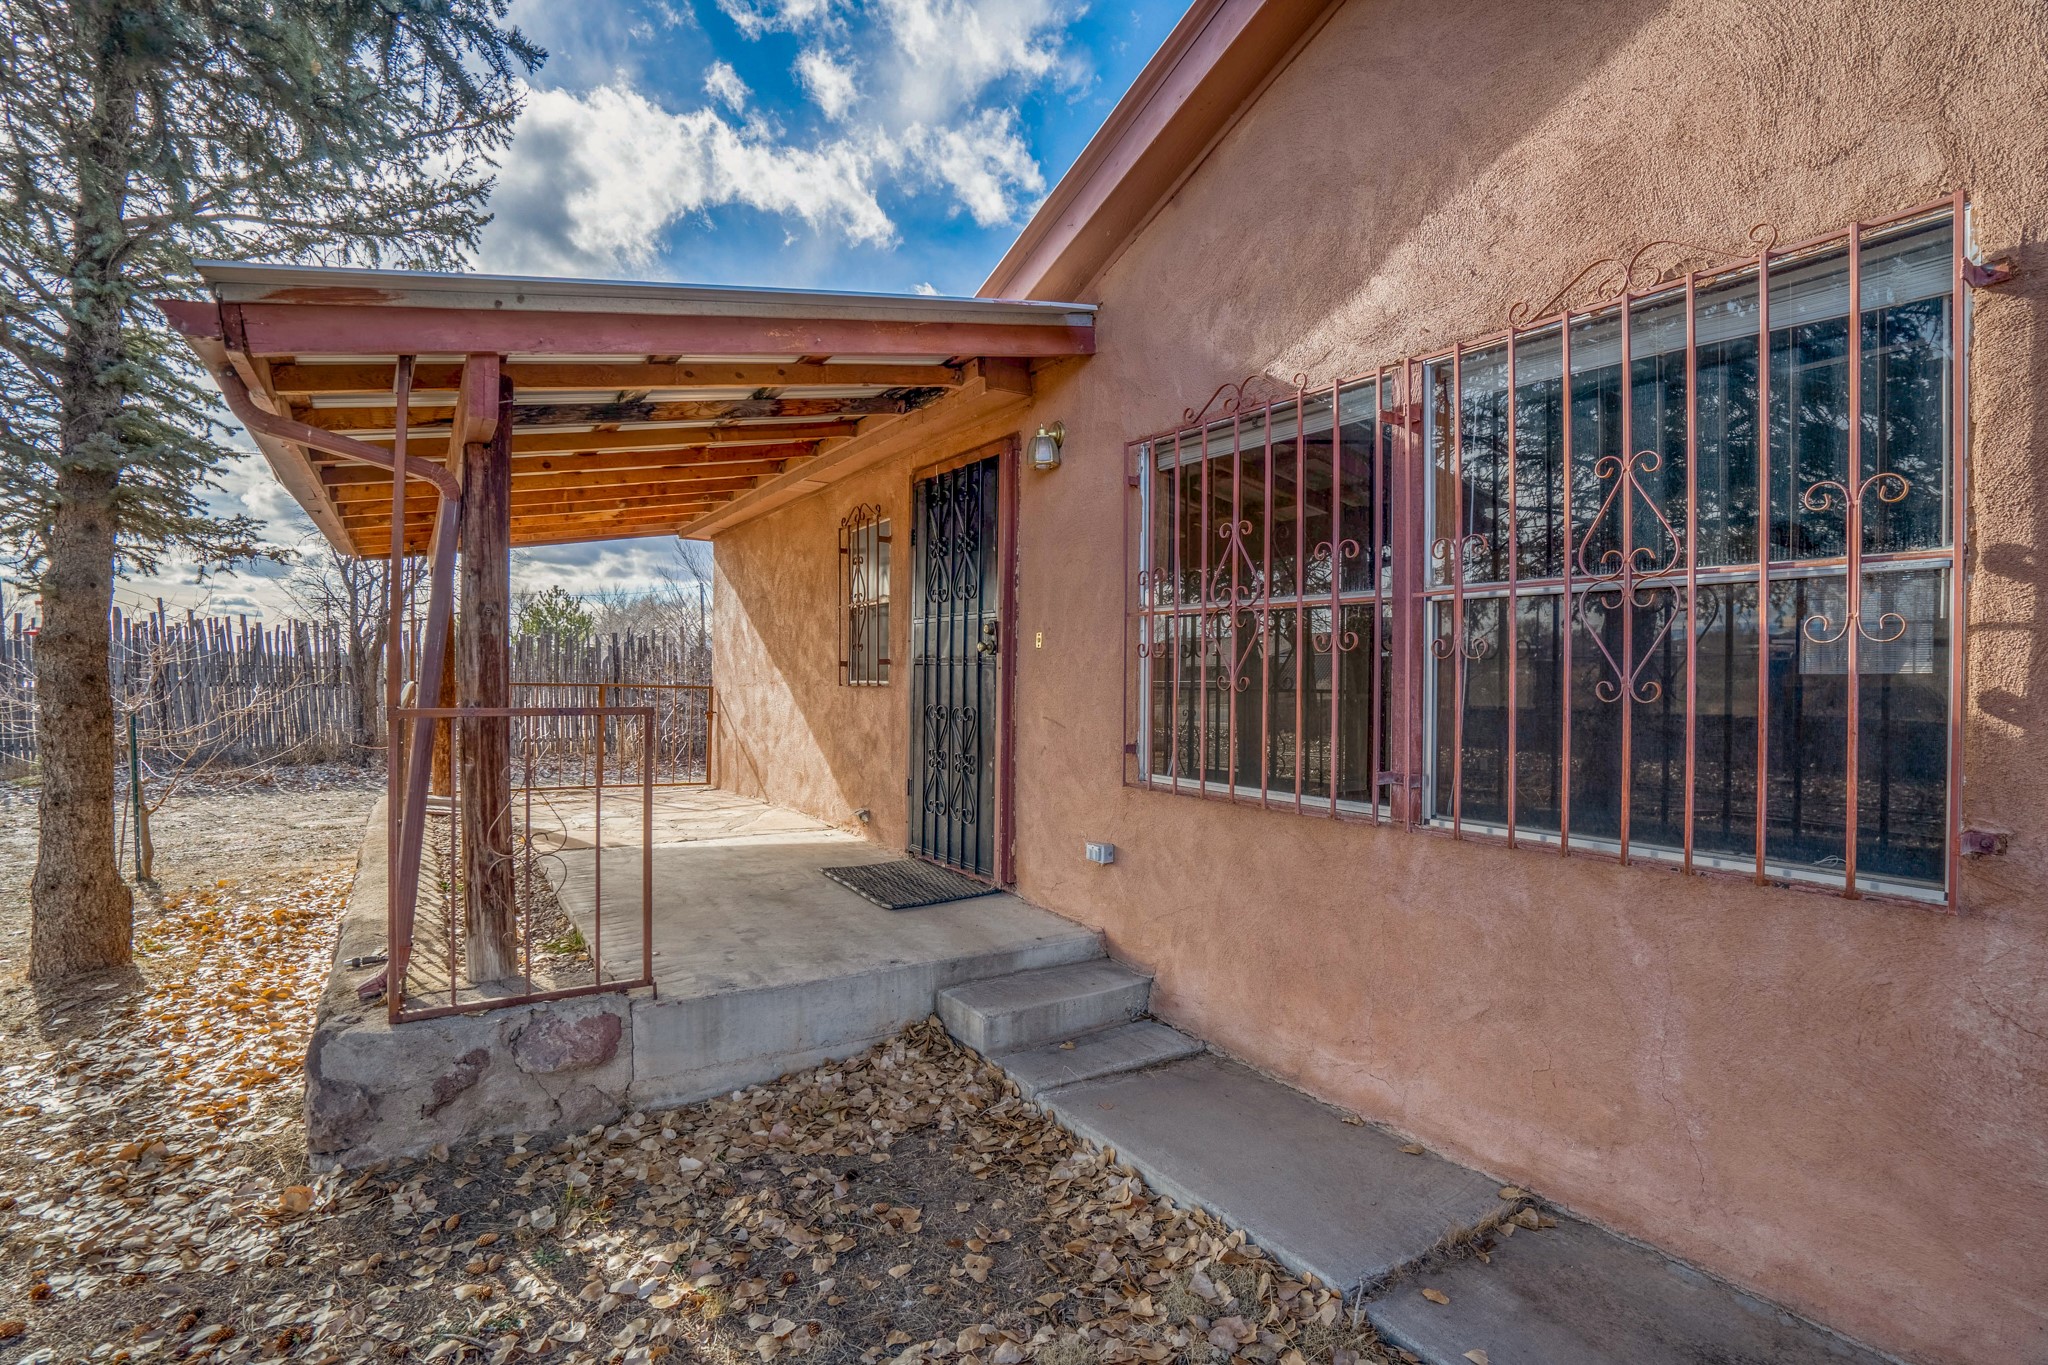 203 County Rd 41, Los Luceros, New Mexico 87511, 3 Bedrooms Bedrooms, ,2 BathroomsBathrooms,Residential,For Sale,203 County Rd 41,202336577